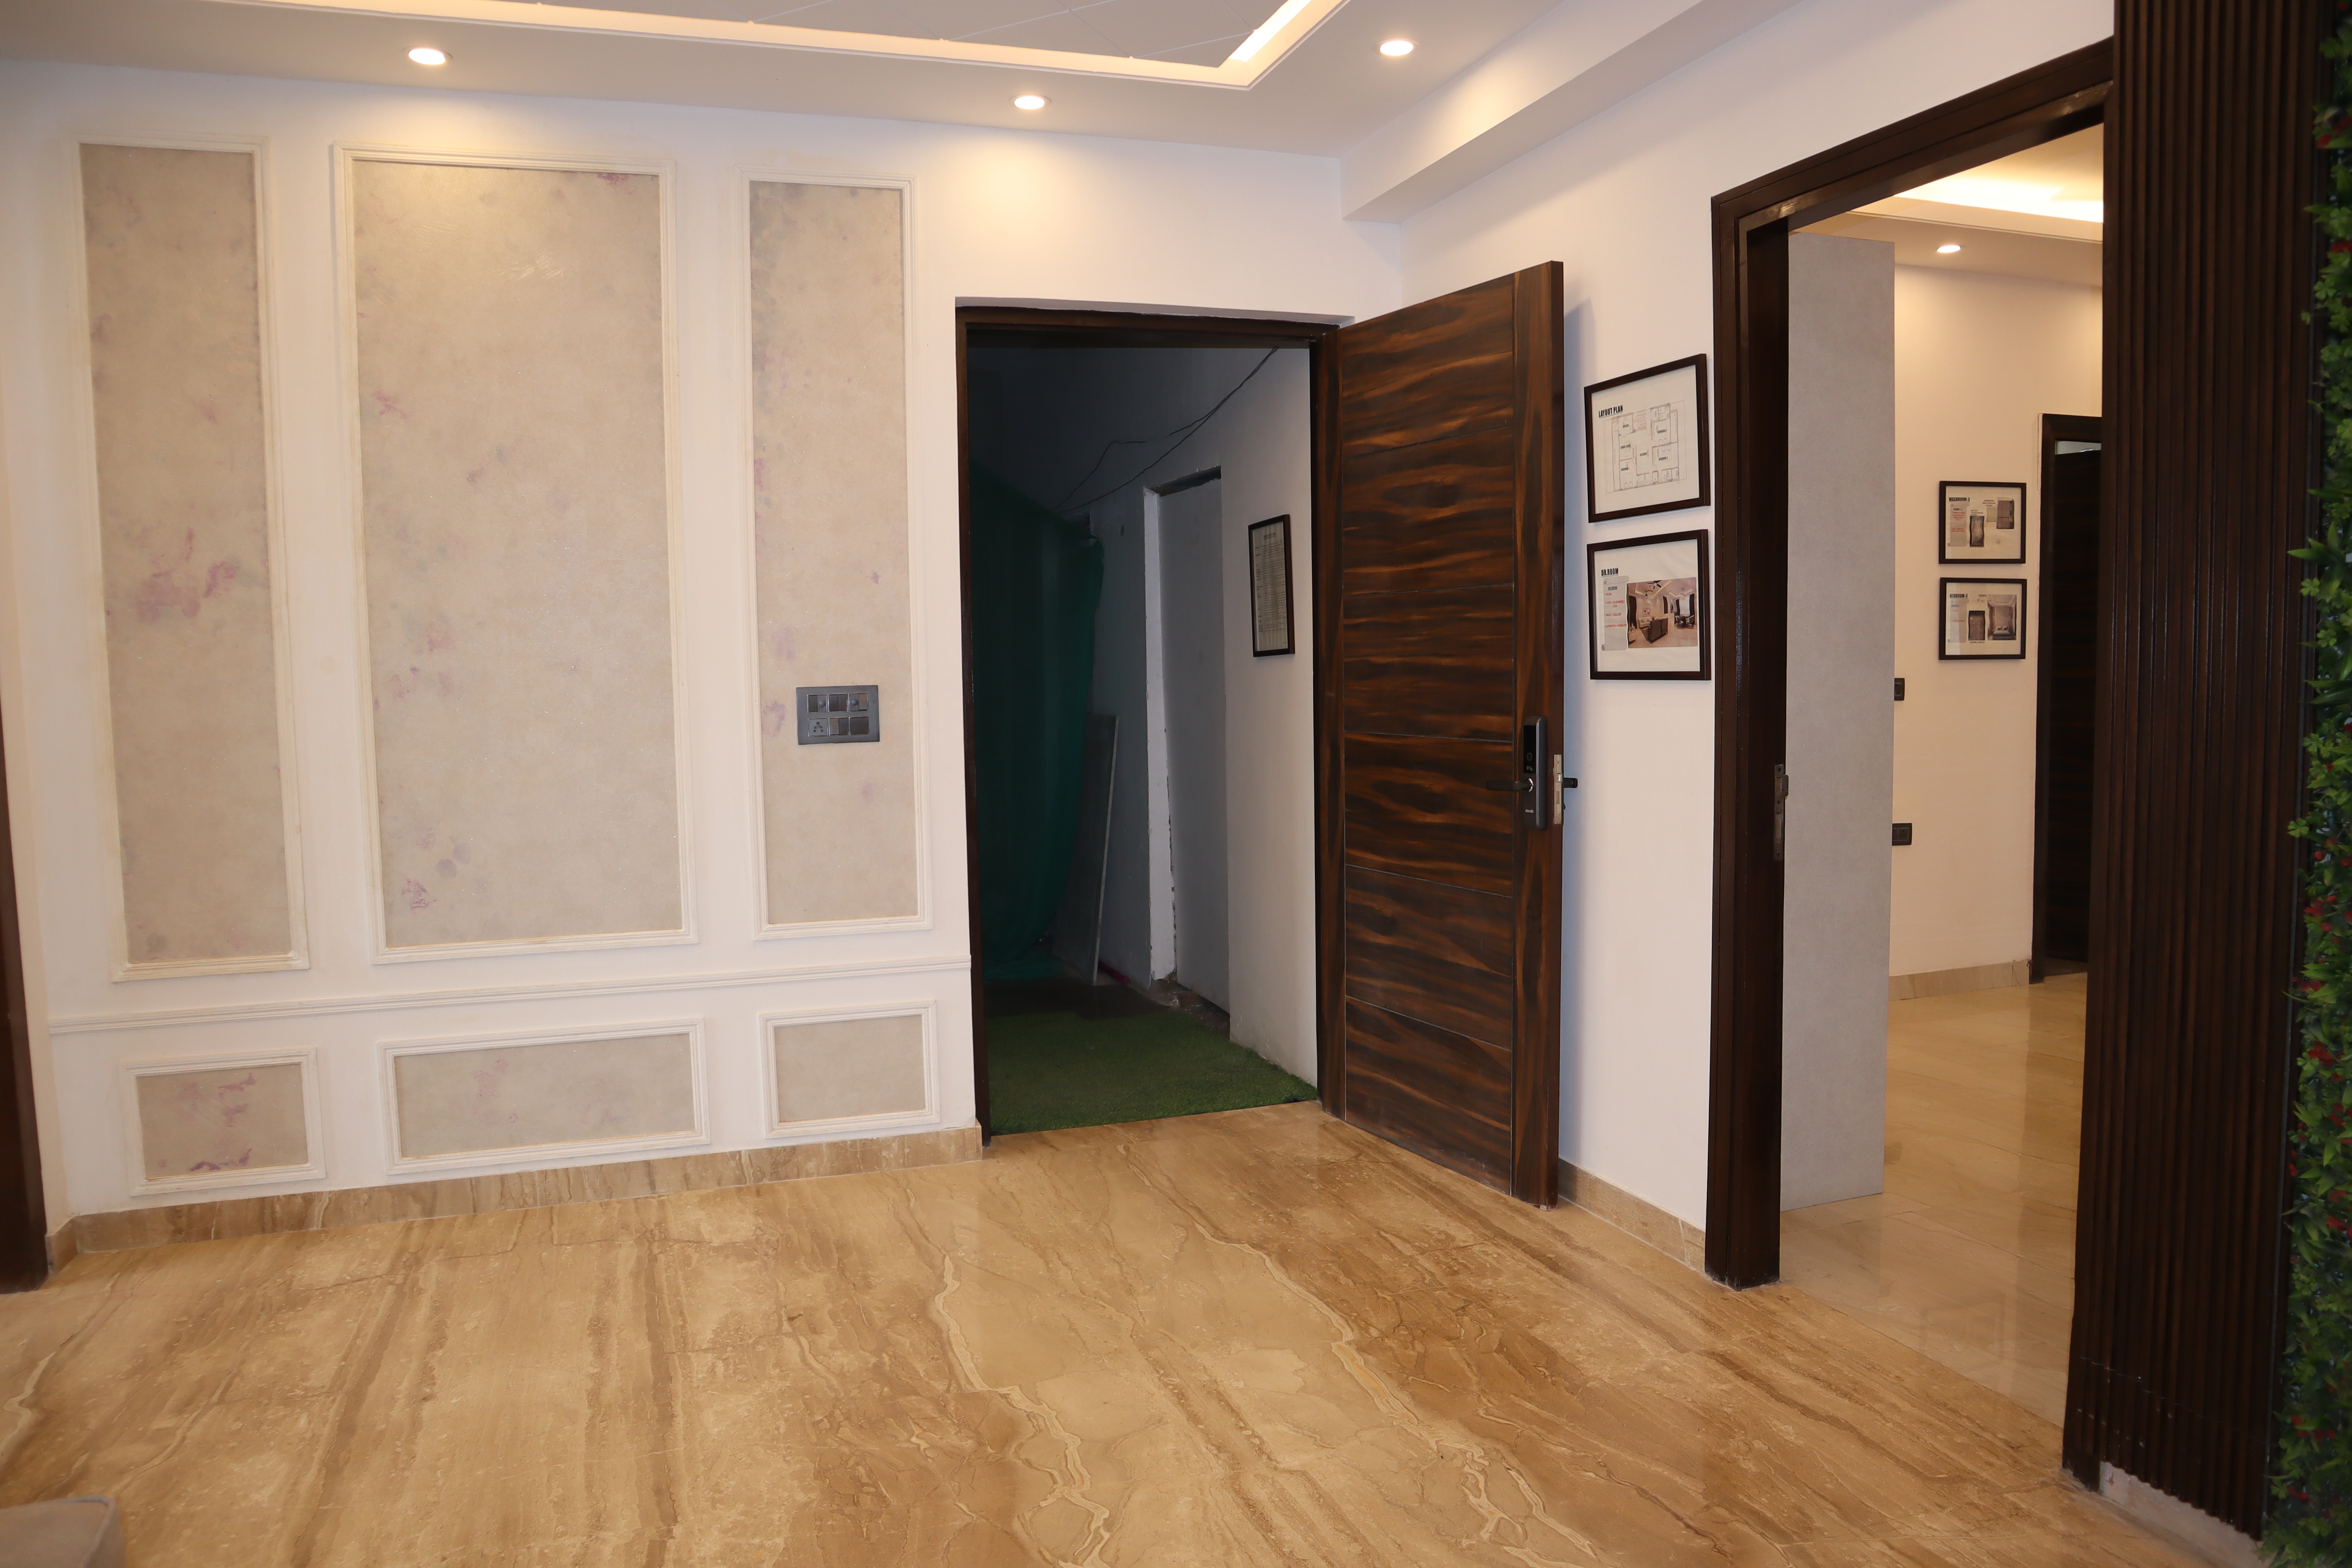 3 BHK Registry Flats in Sultanpur South Delhi